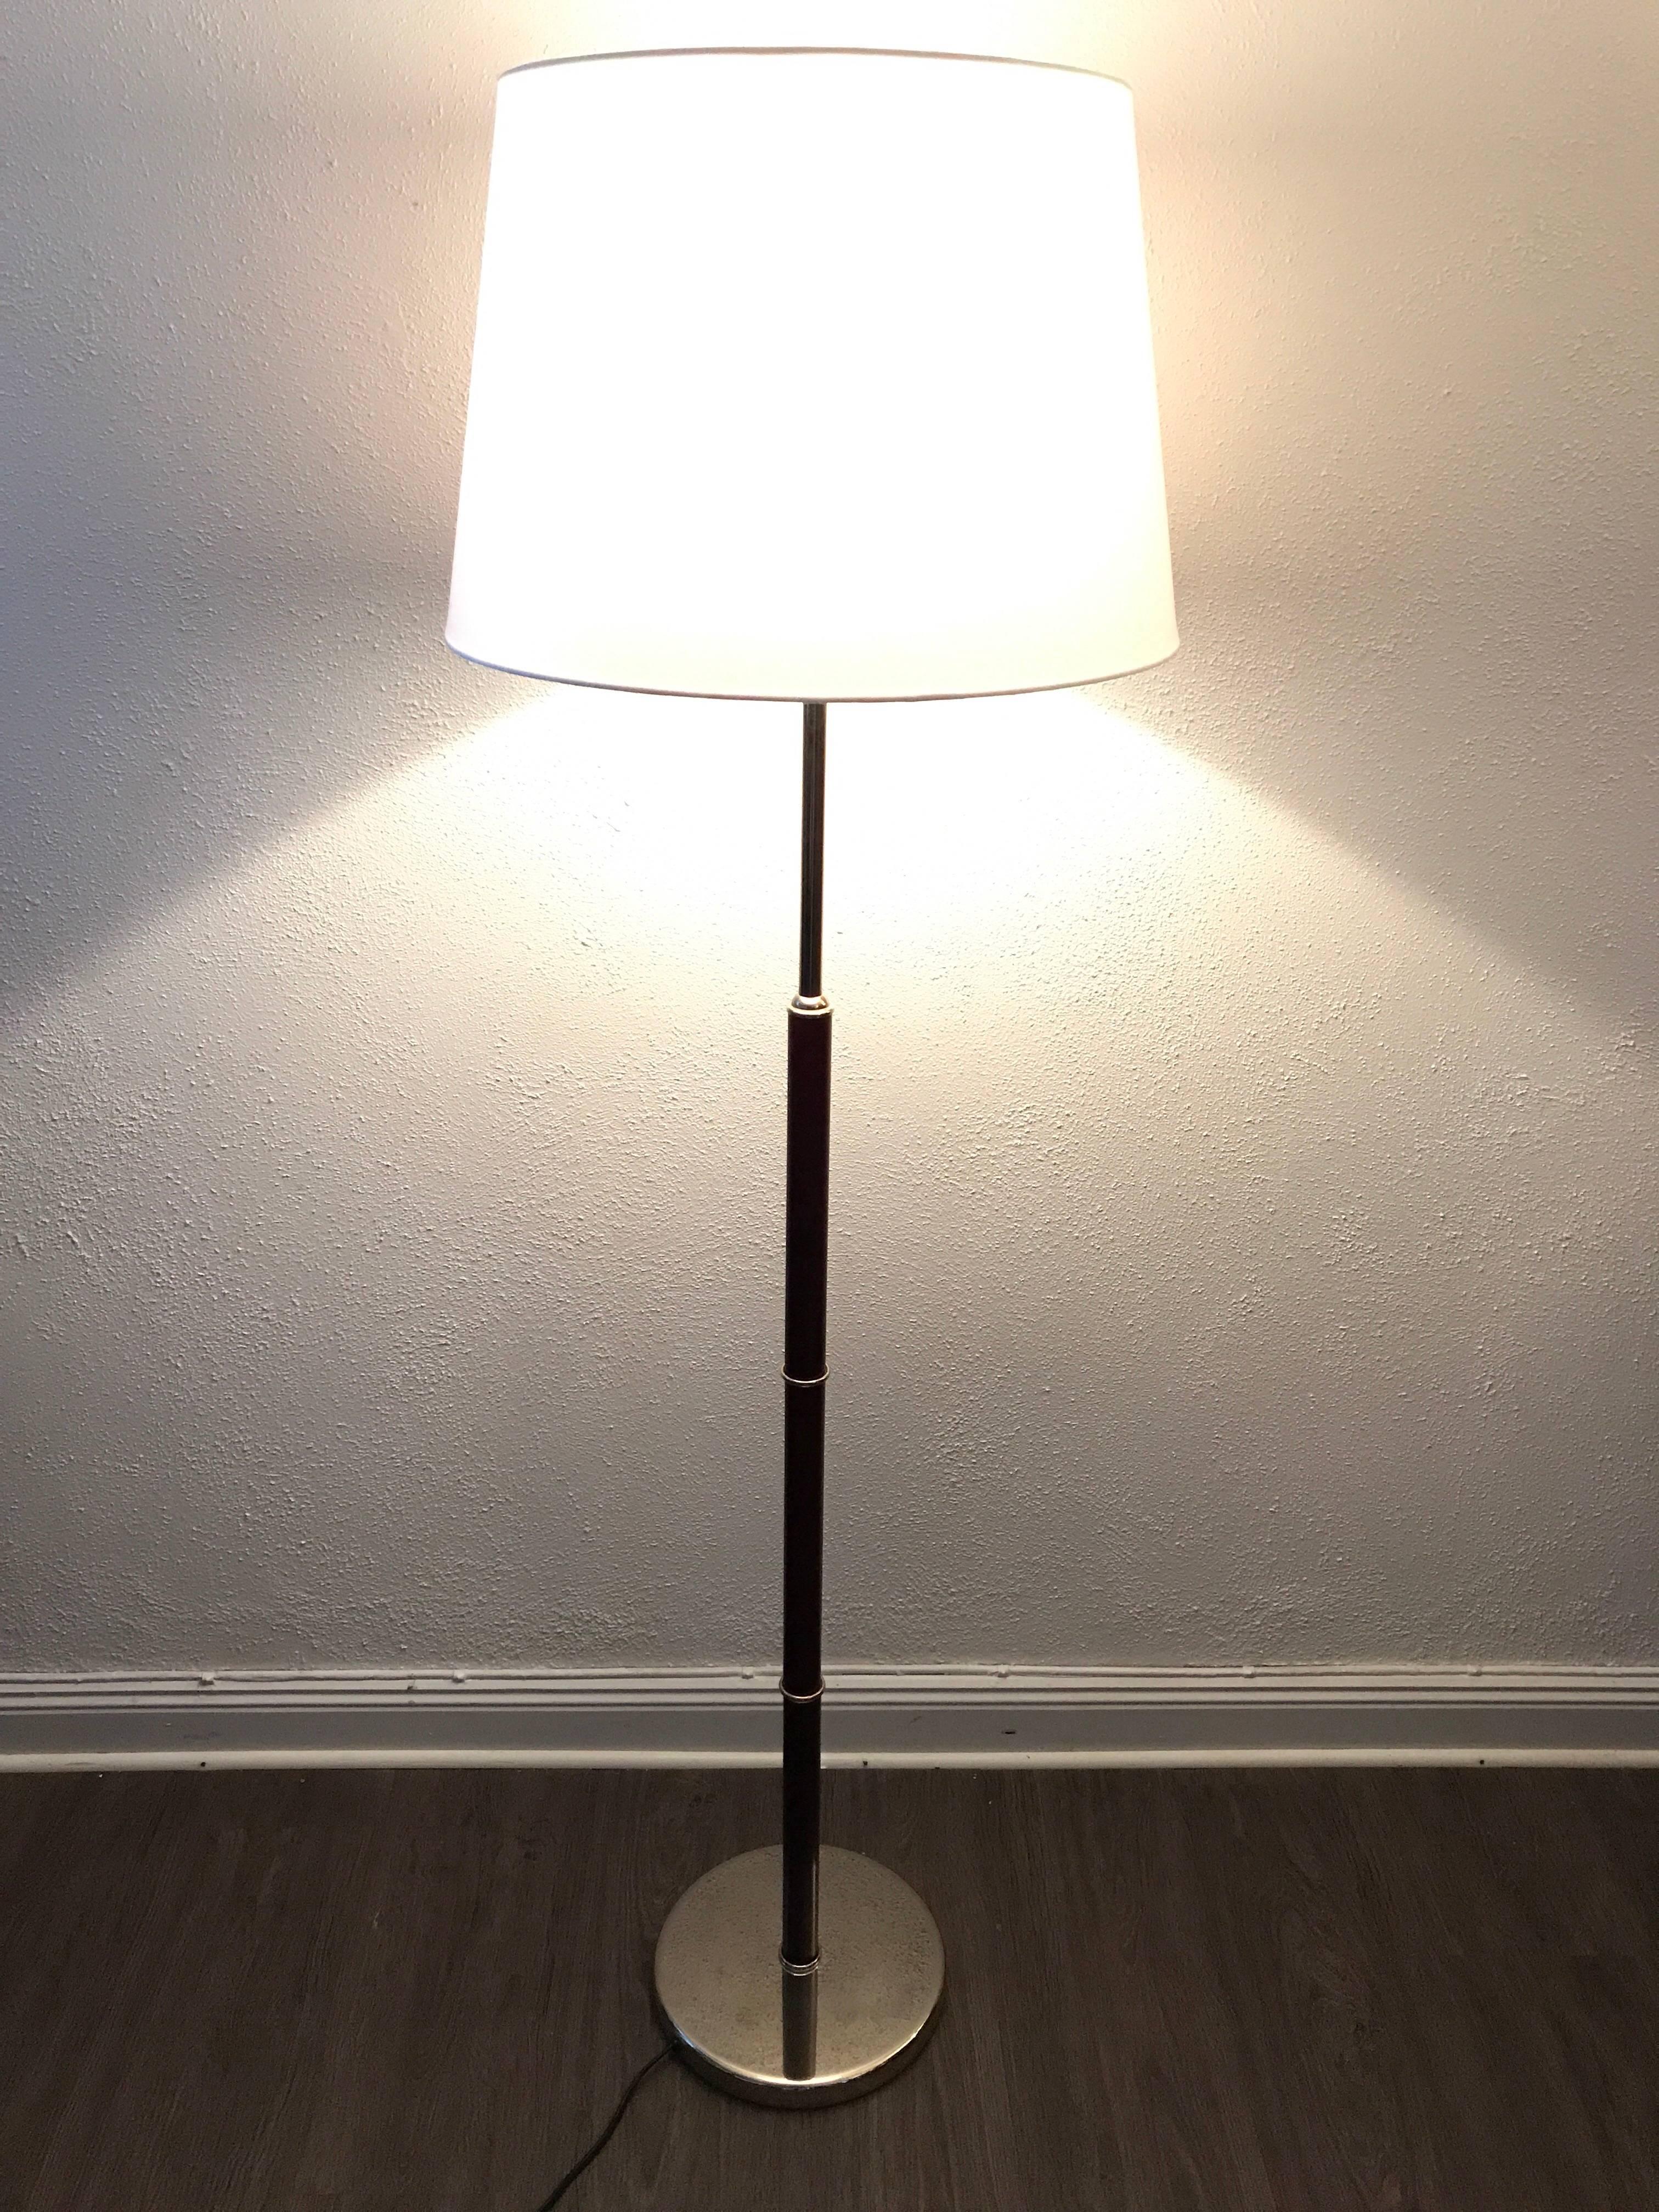 Polished Rare Swedish Cherrywood and Steel Floor Lamp Made by Belid AB, 1980 For Sale